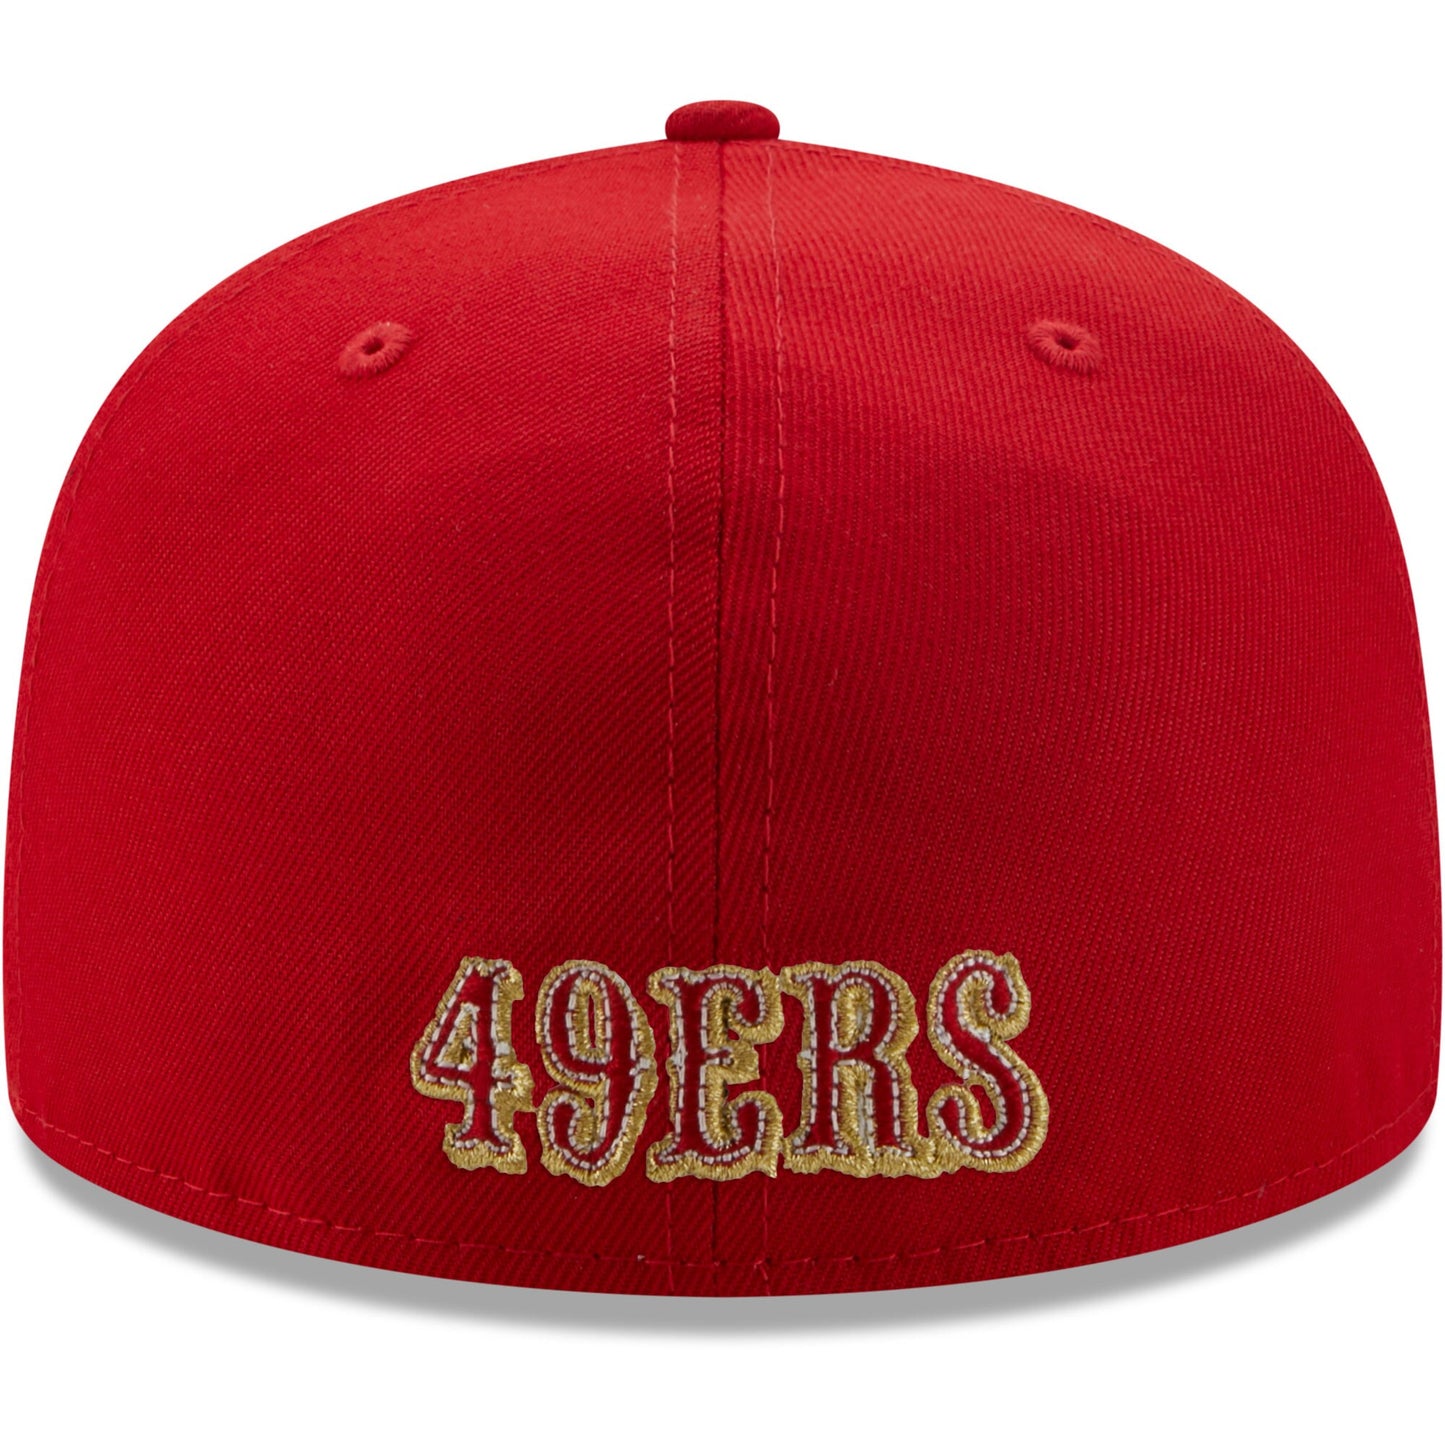 Men's San Francisco 49ers New Era Scarlet Basic 59FIFTY Fitted Hat